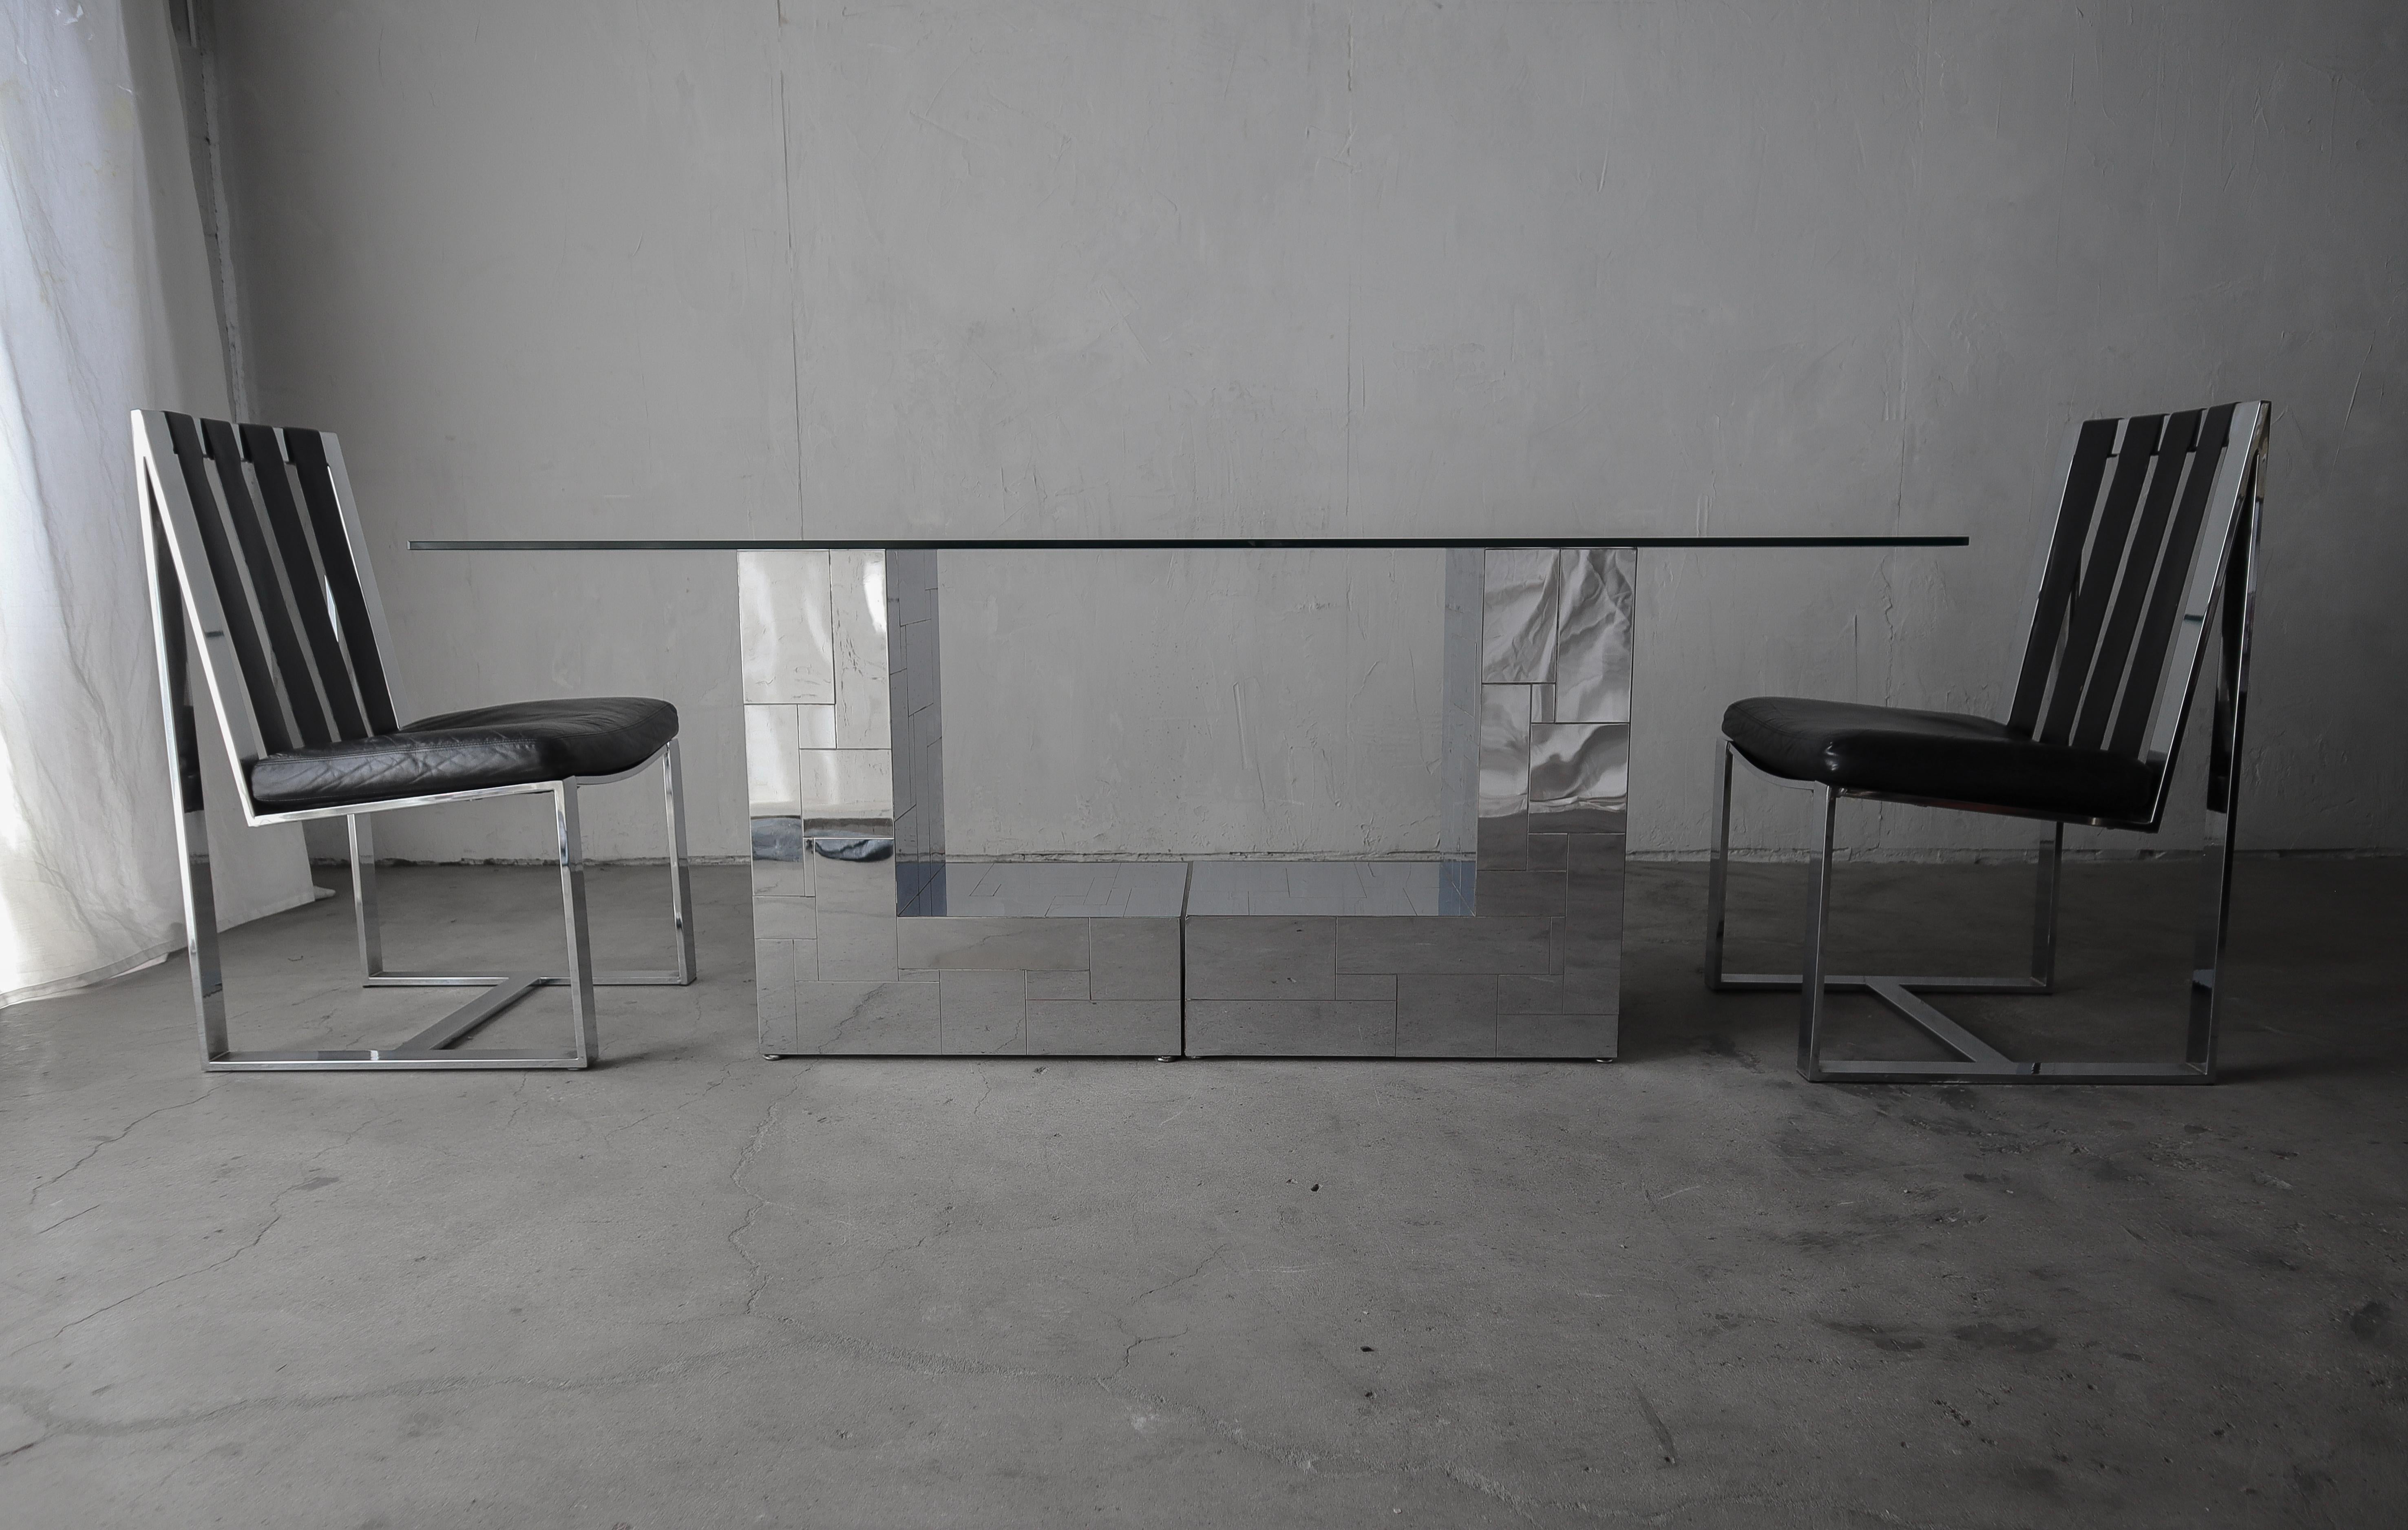 Seize the rare opportunity to own an authentic and rare chrome metal patchwork pedestal dining table by Paul Evans. Table is comprised of 2 L-shaped pedestals clad in chrome pieces laid in a patchwork design.  A perfect example of the uniqueness and